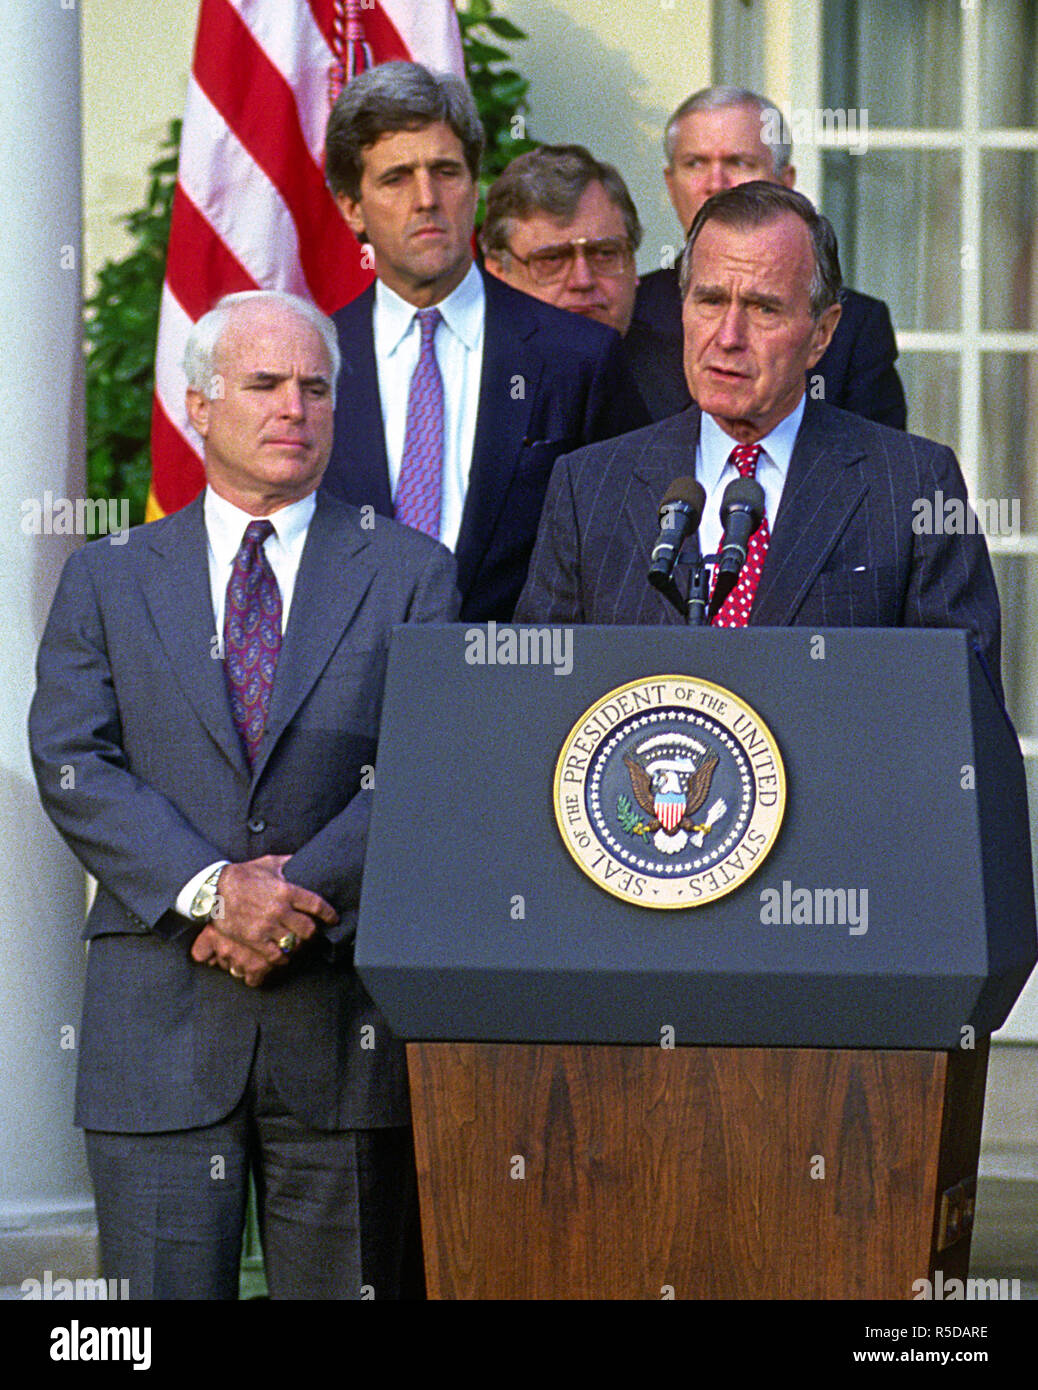 Washington, DC - (FILE) -- United States President George H.W. Bush announces the Government of Vietnam has agreed to make available all information including photographs, artifacts, and military documents on United States prisoners of war (POWs) and those missing in action (MIAs) in the Rose Garden of the White House on Friday, October 23, 1992. Pictured from left to right: United States Senator John McCain (Republican of Arizona); United States Senator John F. Kerry (Democrat of Massachusetts); United States Secretary of State Lawrence Eagleburger; Director of Central Intelligence Robert M. Stock Photo